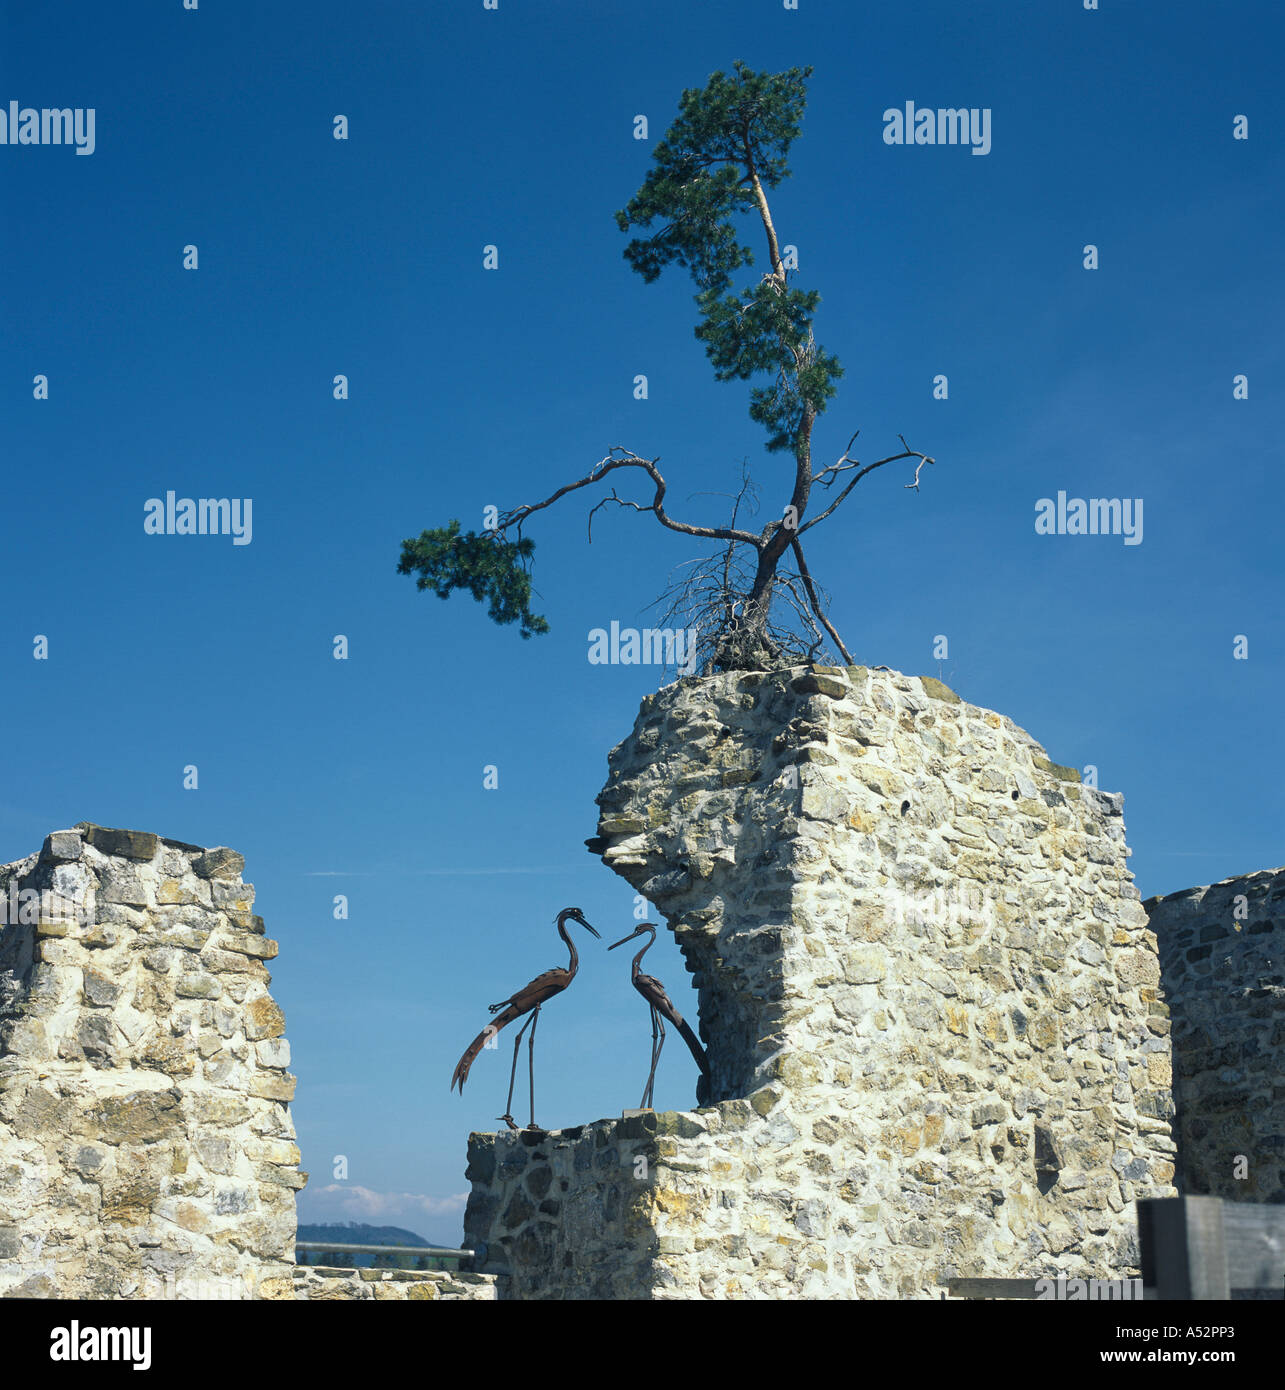 Reinsberg district of Scheibbs Lower Austria ruins of the castle Reinsberg stronghold rest of the walls with two cranes Stock Photo